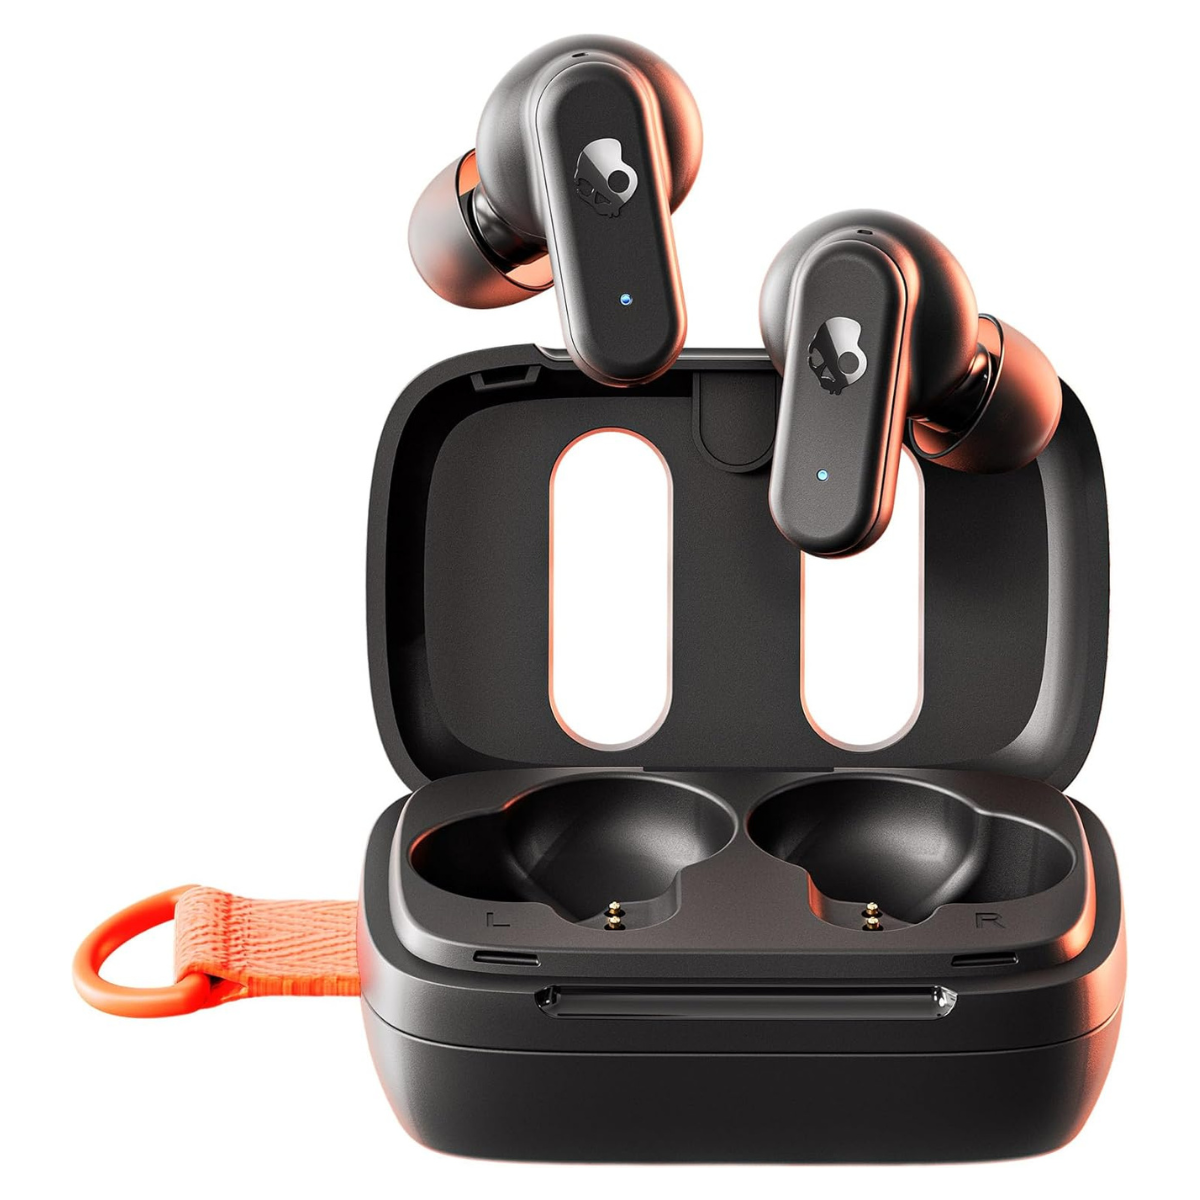 The Skullcandy Dime 3 True Wireless Earbuds hovering above their case